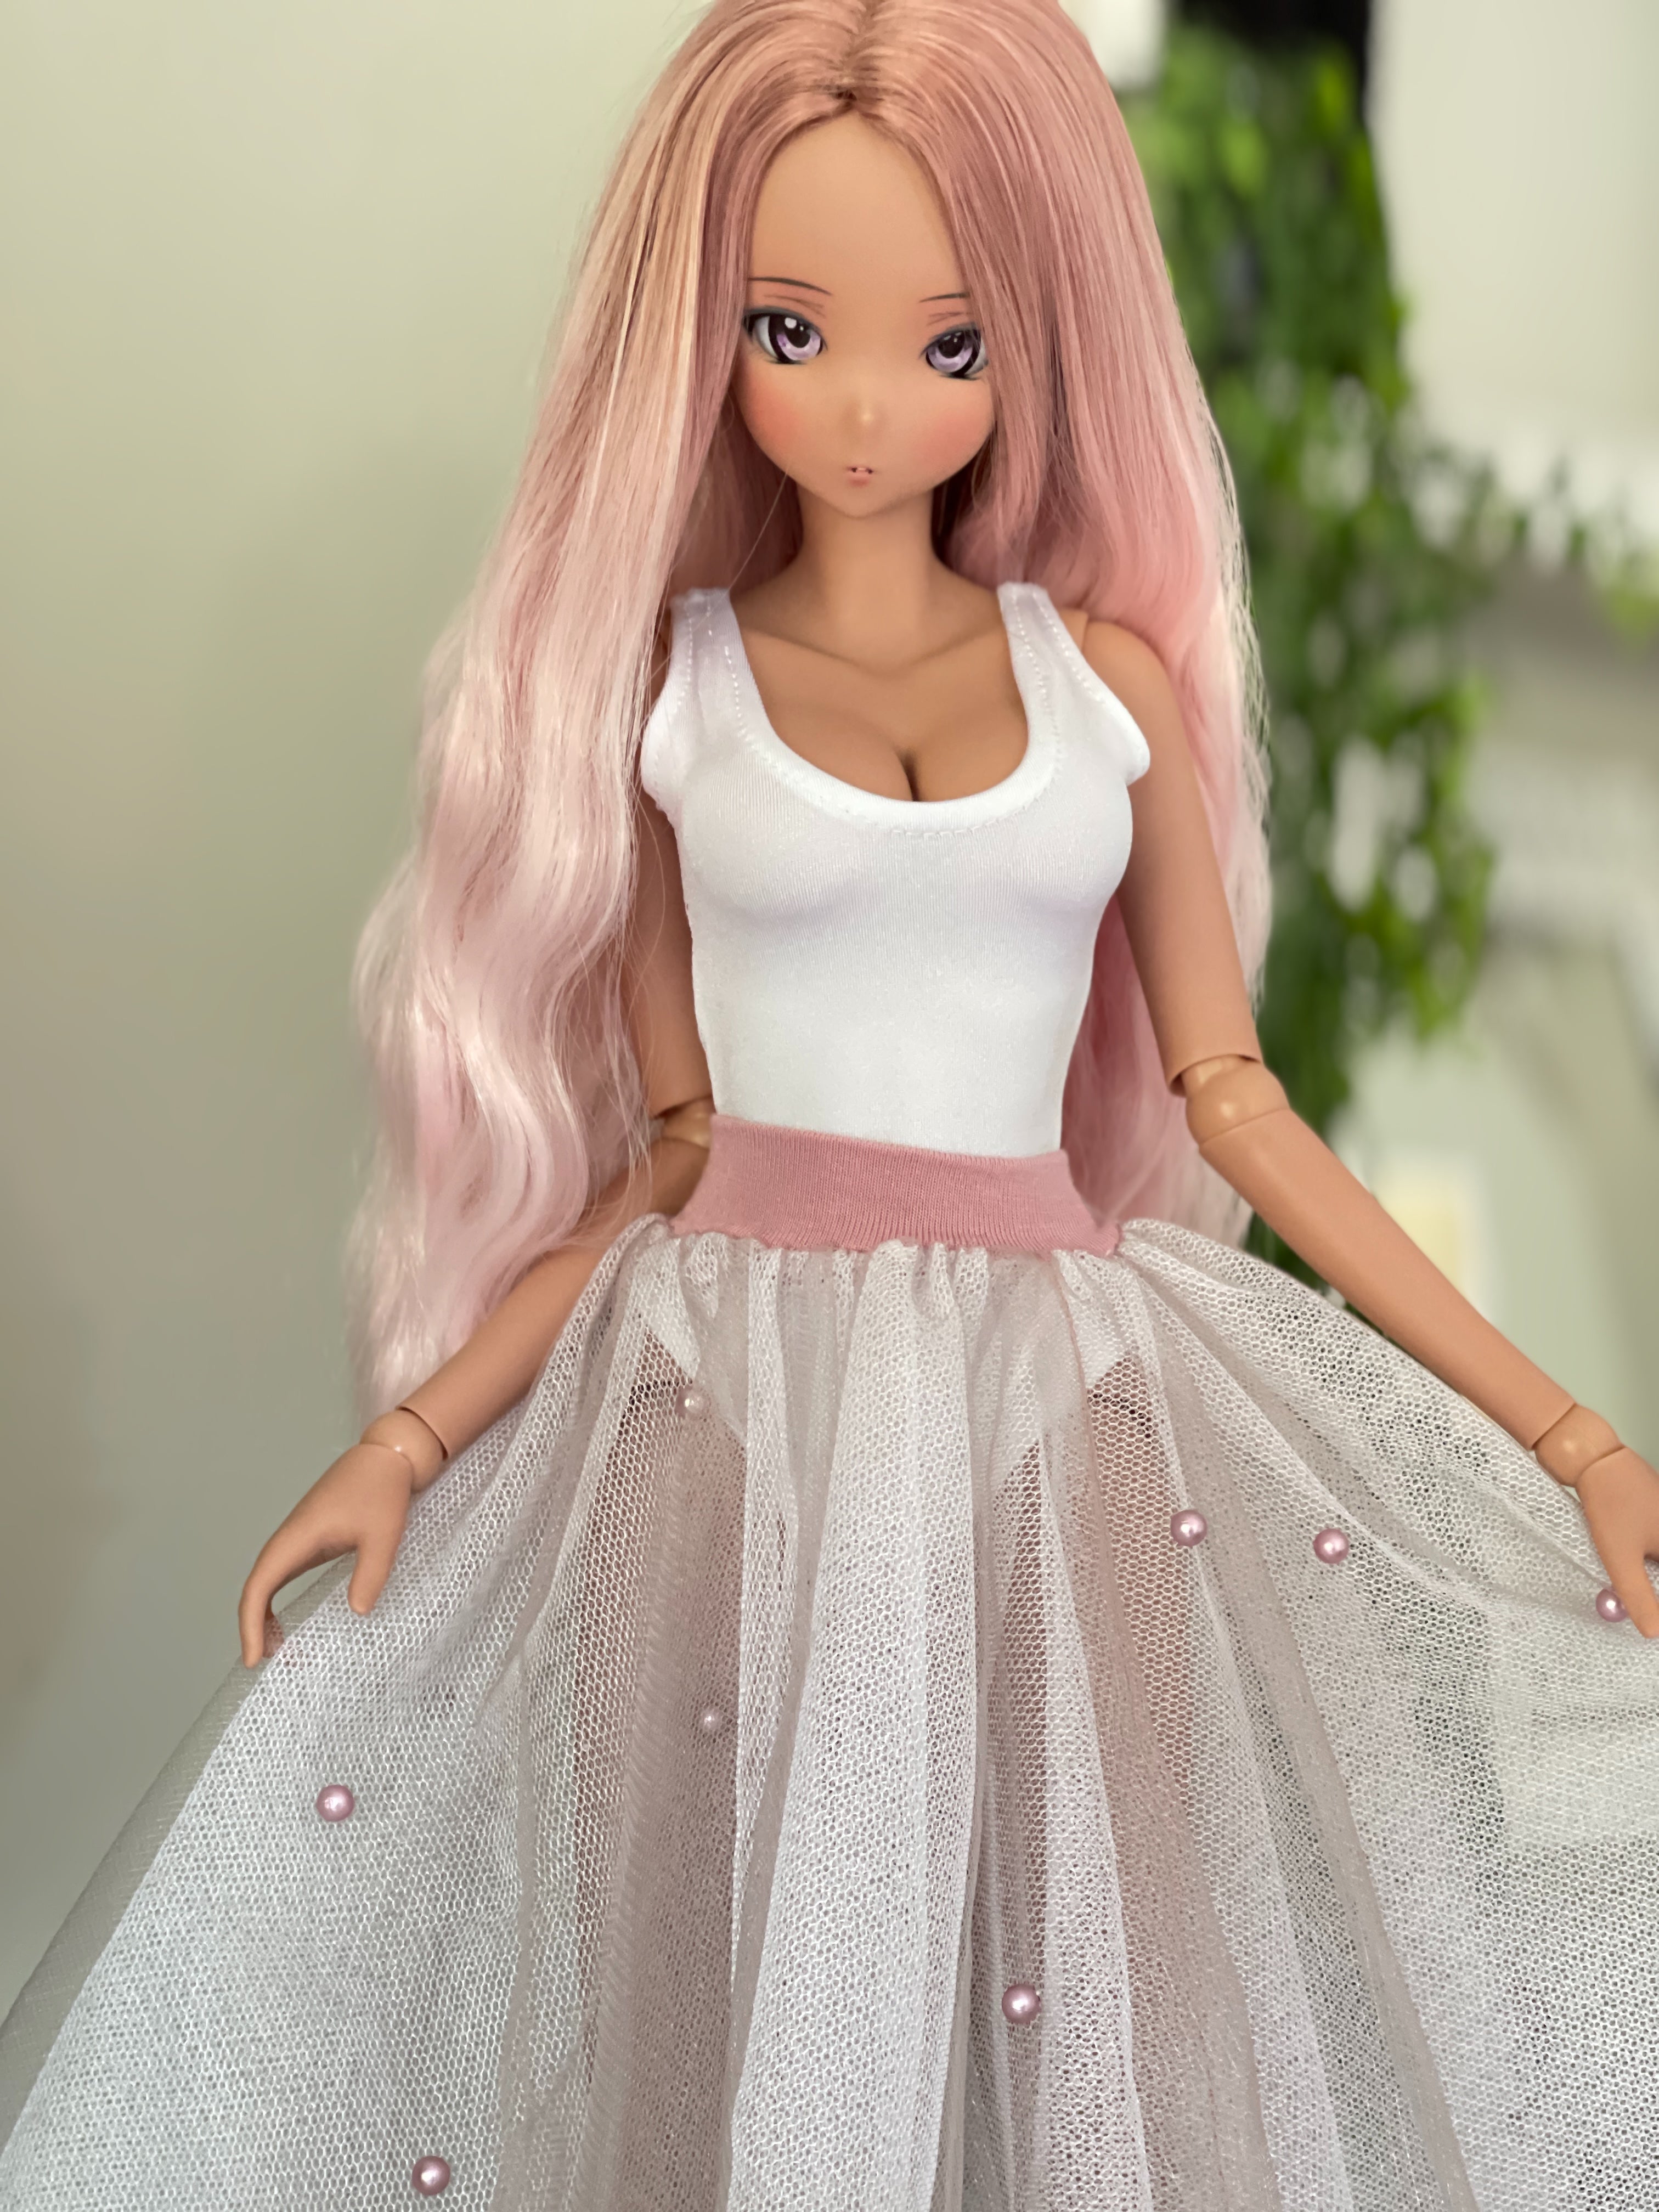 C.C. [Mirai Inc. - Smart Doll] - $975.00 : Fabric Friends Doll Shop - Ball  Jointed Dolls, Plush Gifts and Collectibles in Maryland